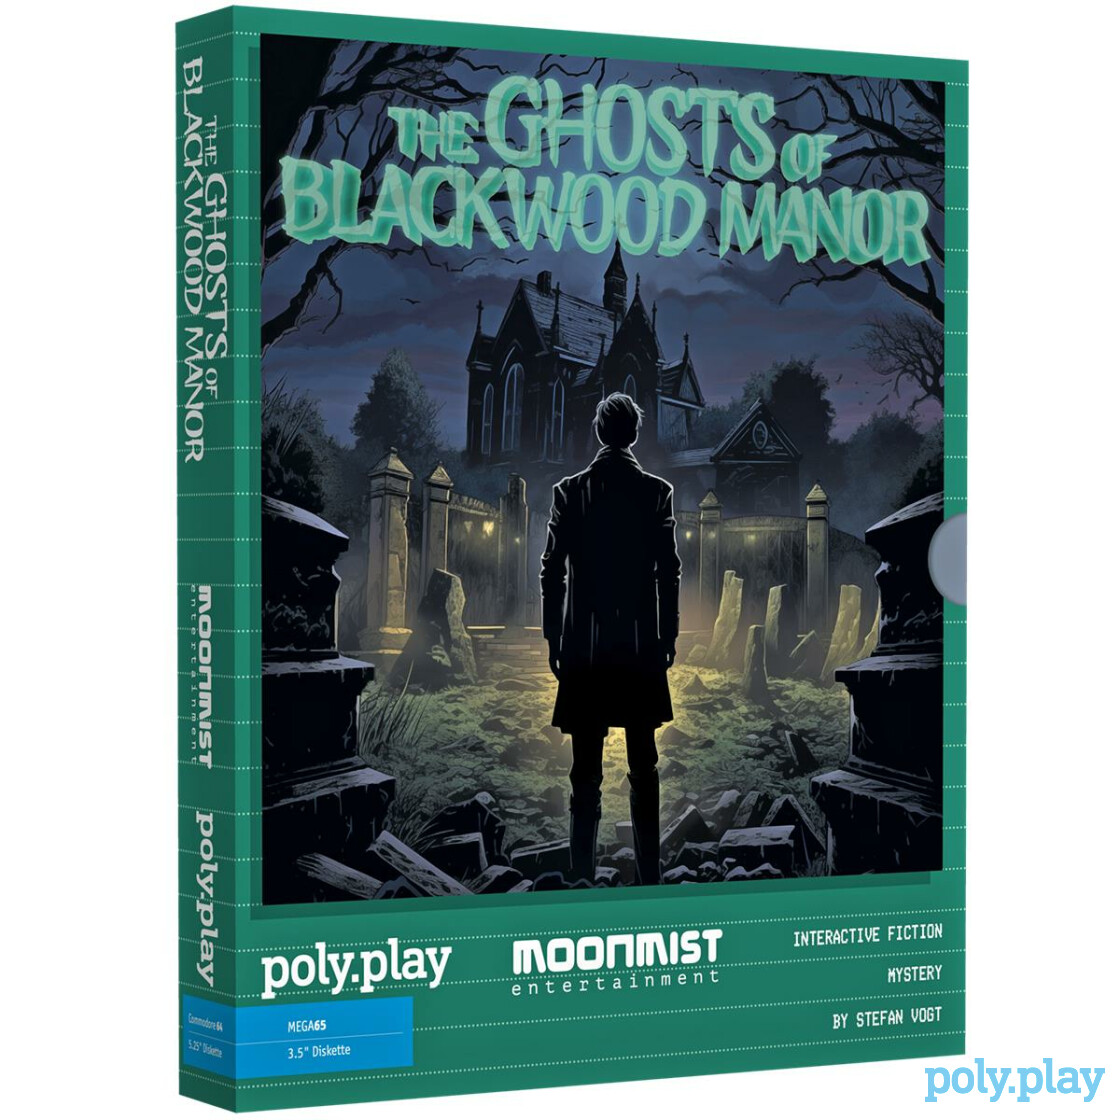 The Ghosts of Blackwood Manor, by Stefan Vogt